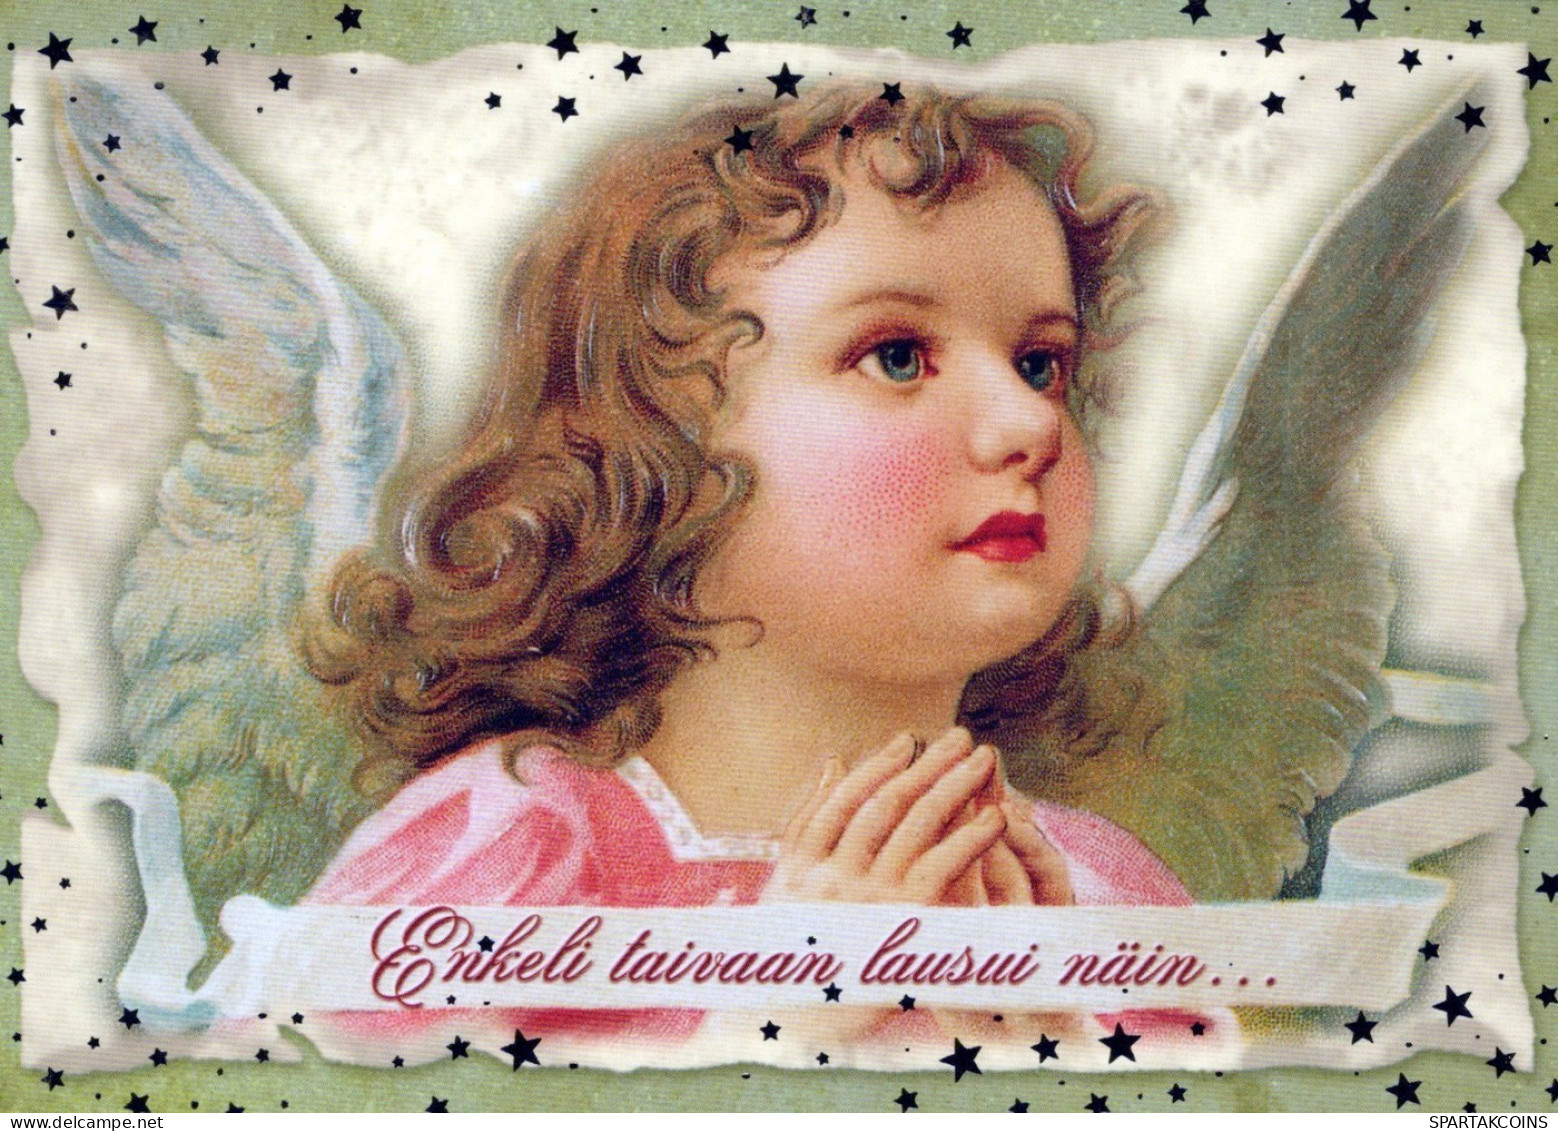 ANGELO Buon Anno Natale Vintage Cartolina CPSM #PAH071.IT - Angeles